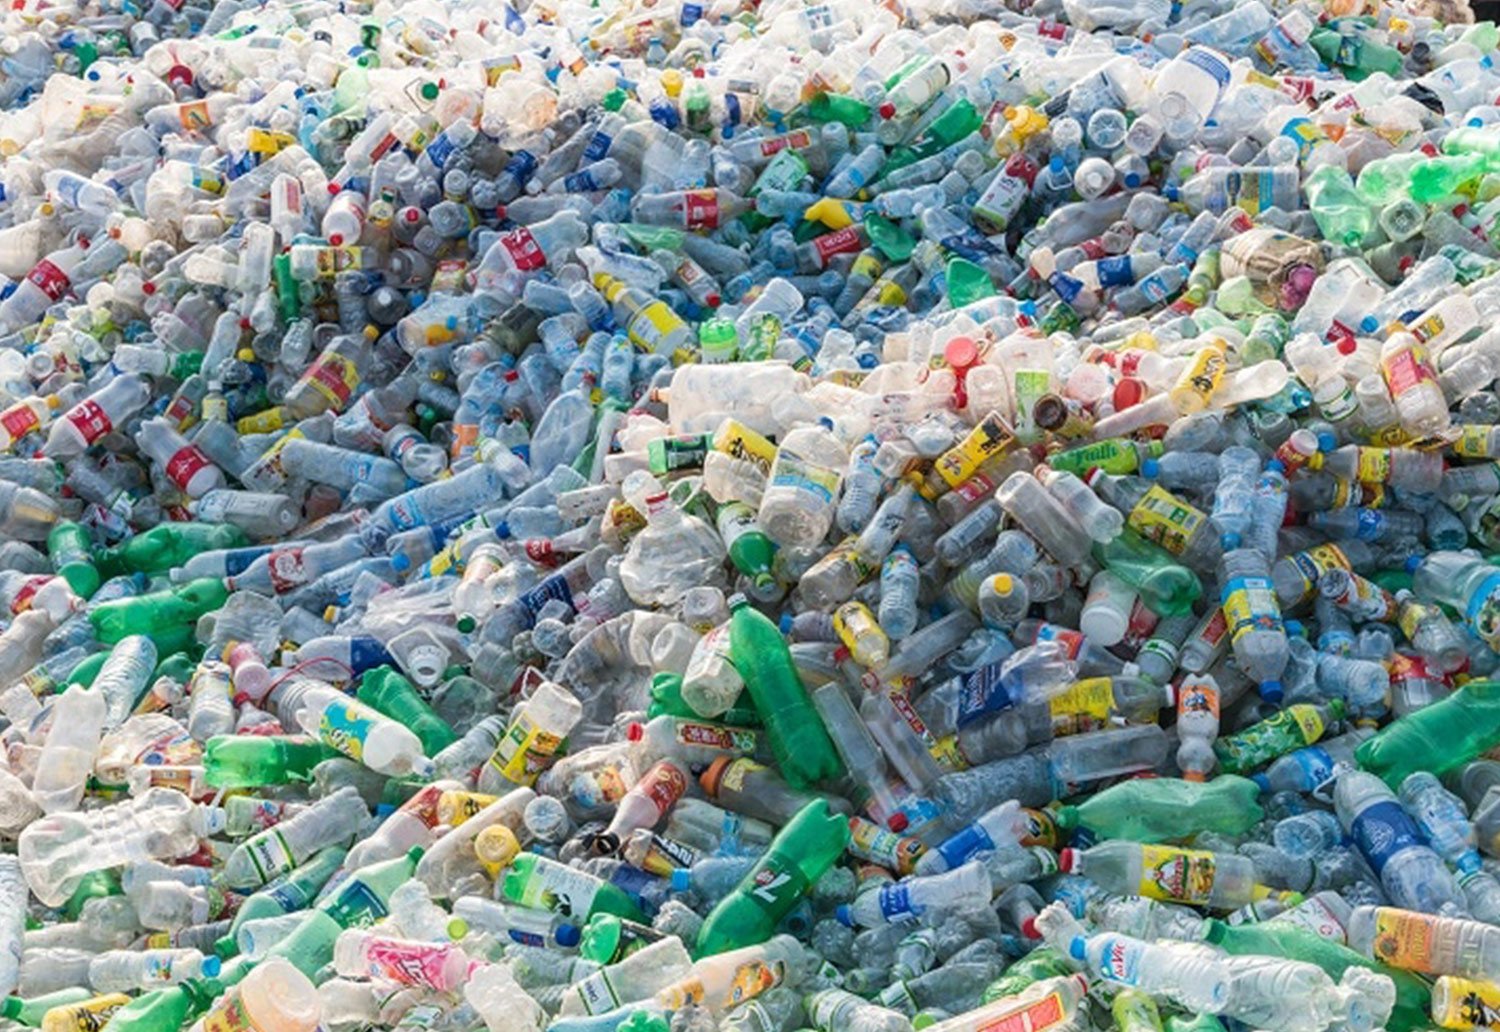 Image of plastic pollution